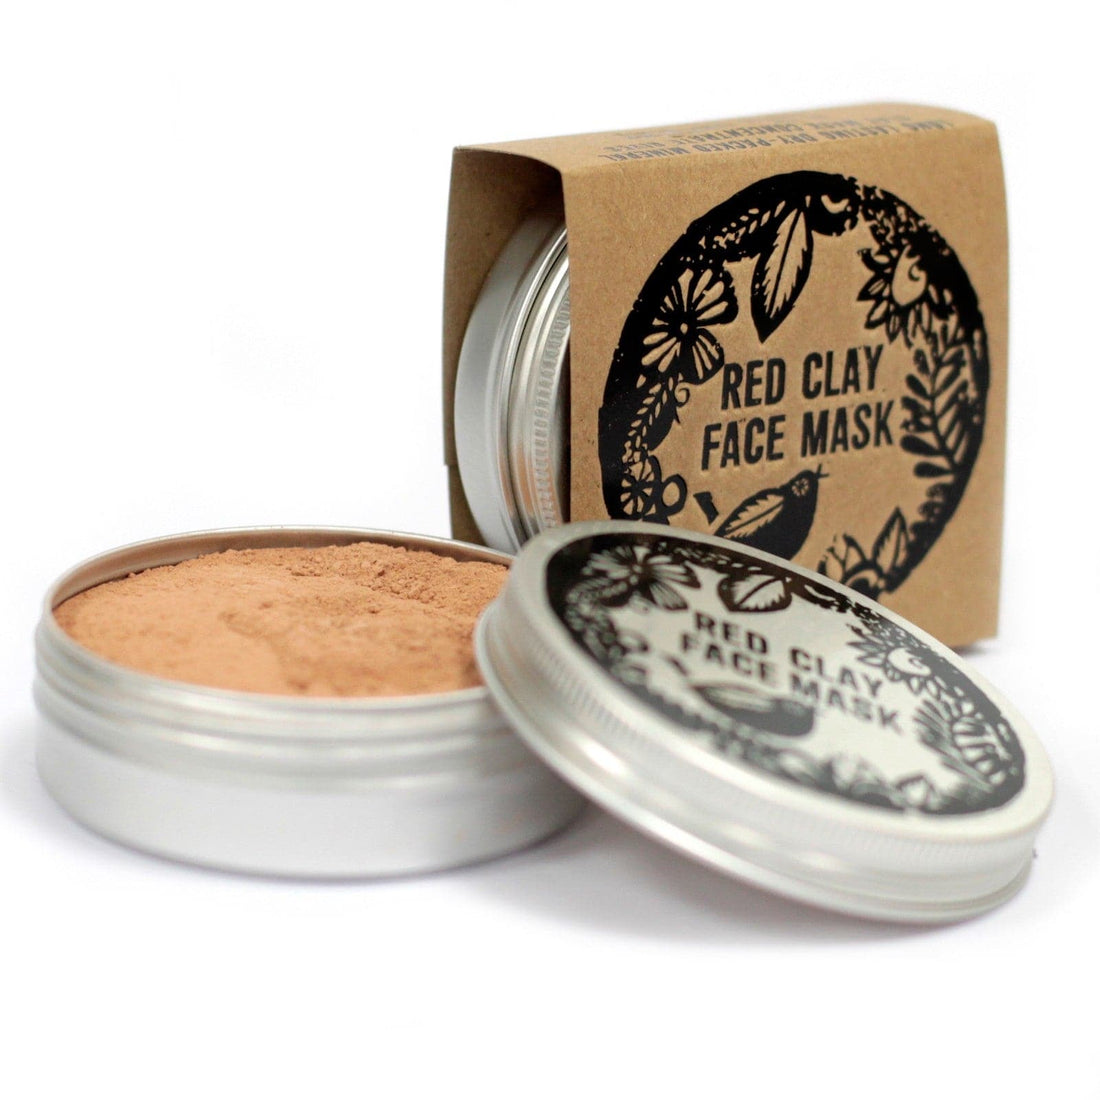 Red Clay Face Mask 80g - best price from Maltashopper.com ACFM-01DS